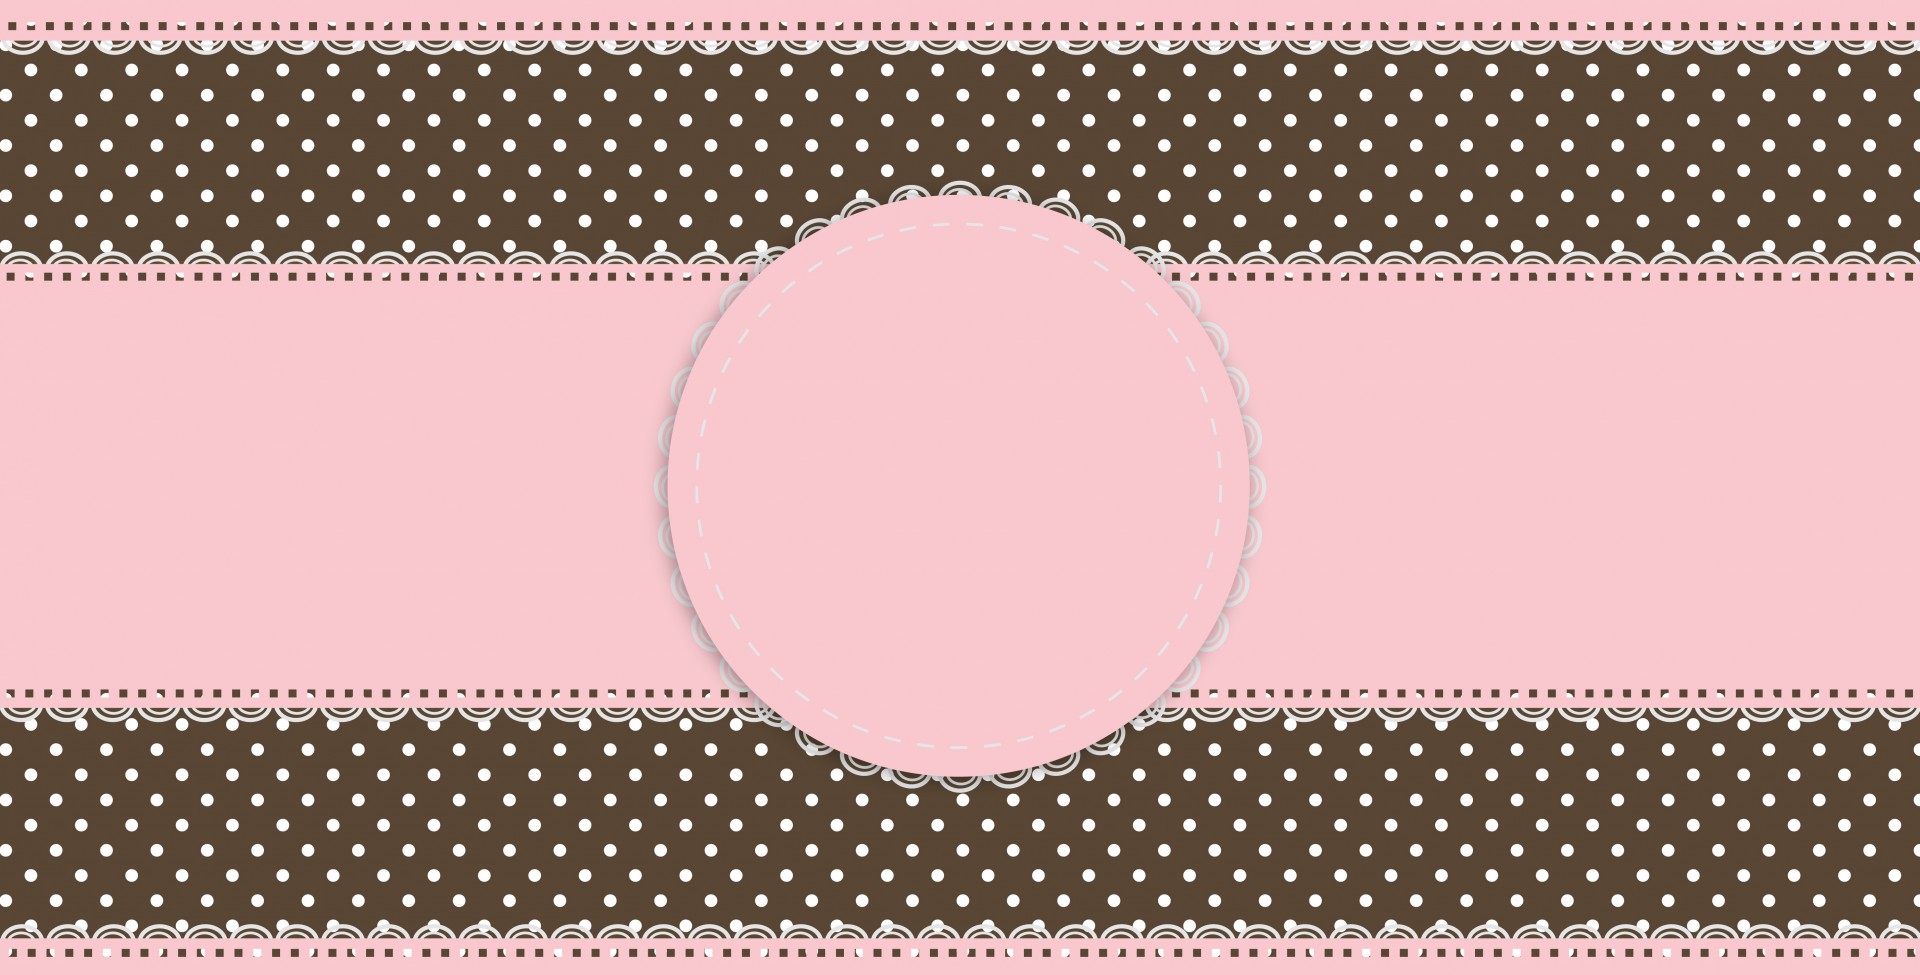 Pink Lace and brown and white polka dots fancy border